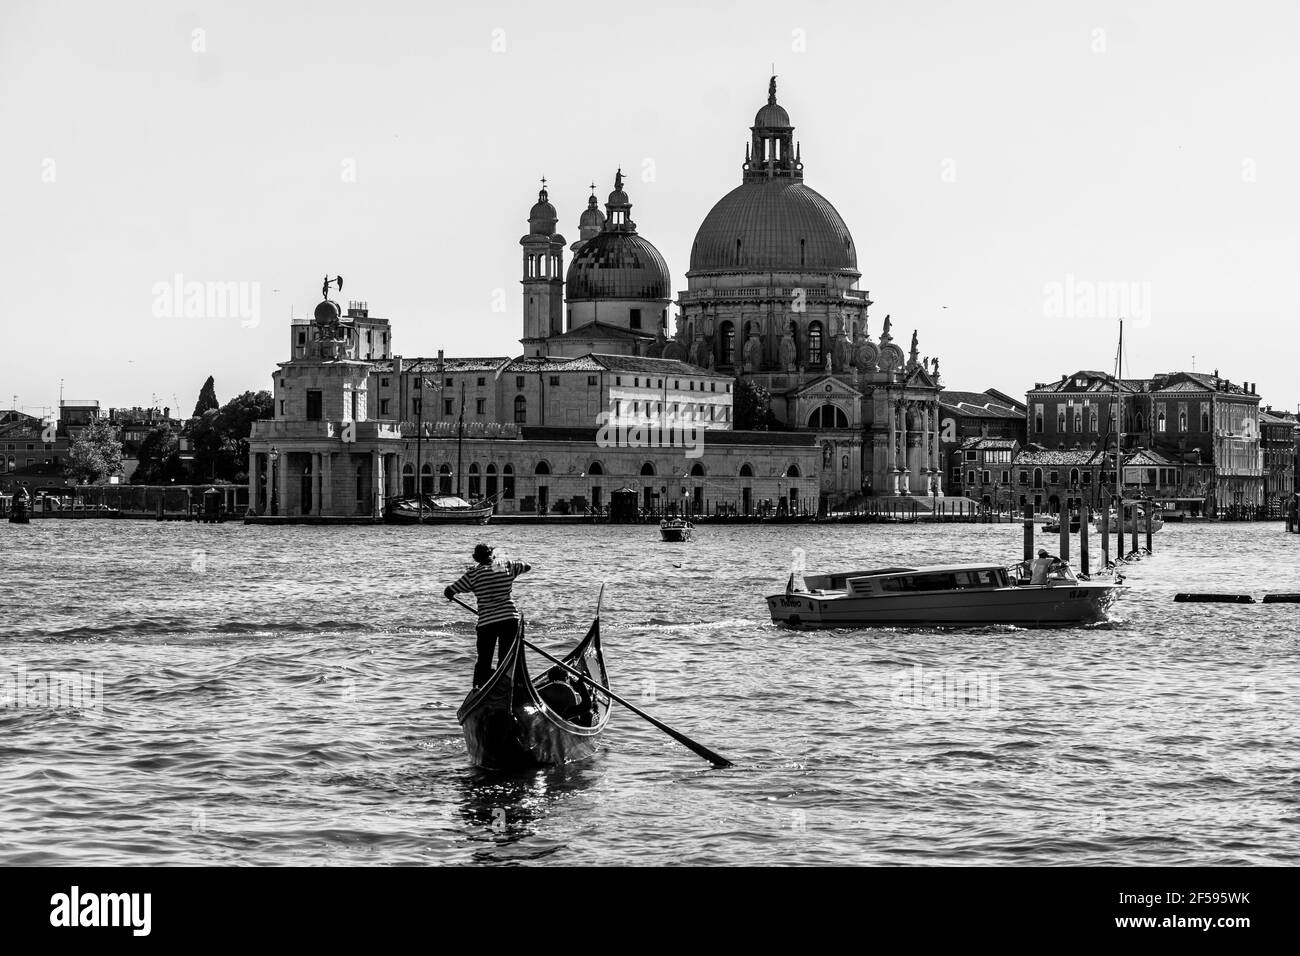 Venice, Italy - June 22 2020: A classic black and white view of a traditional gondola that sails on the Venice Grand Canal with the Basilica di Santa Stock Photo